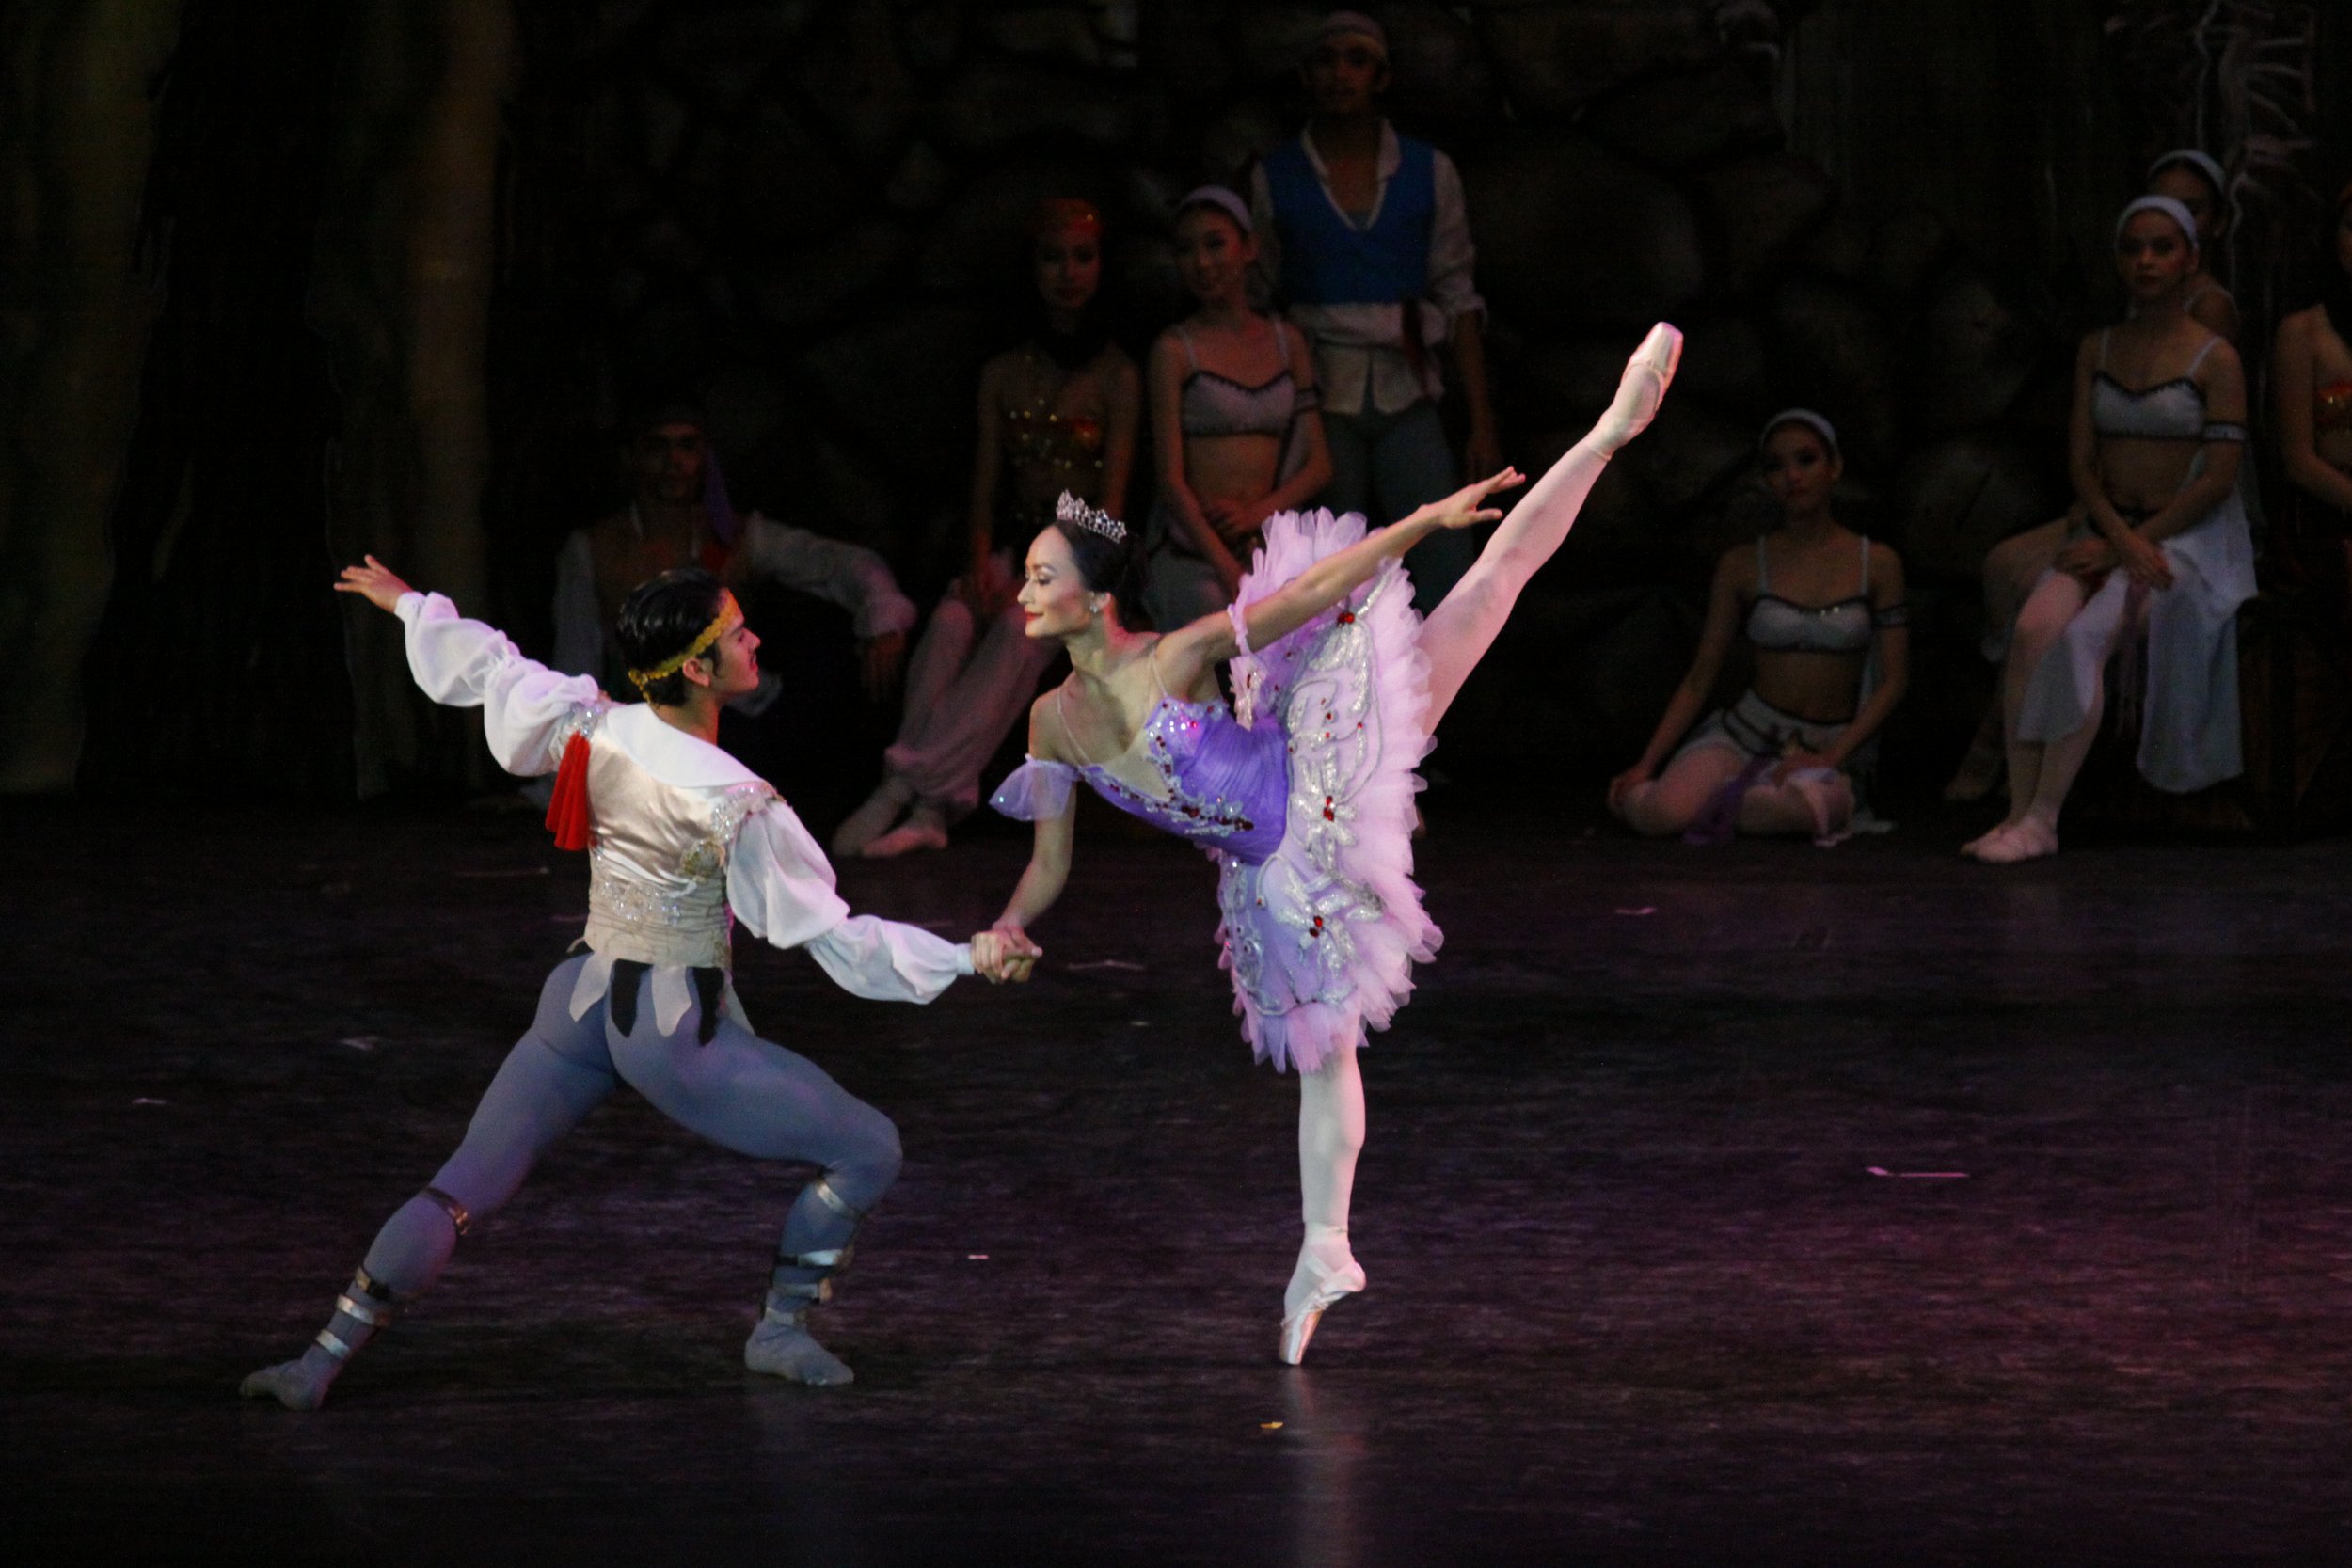    Lisa Macuja-Elizalde is a vision in violet as the perennially-in-peril Medora while Rudy De Dios is the dashing pirate Conrad always ready to save her in  Le Corsaire  (2013). Photo by Ocs Alvarez   